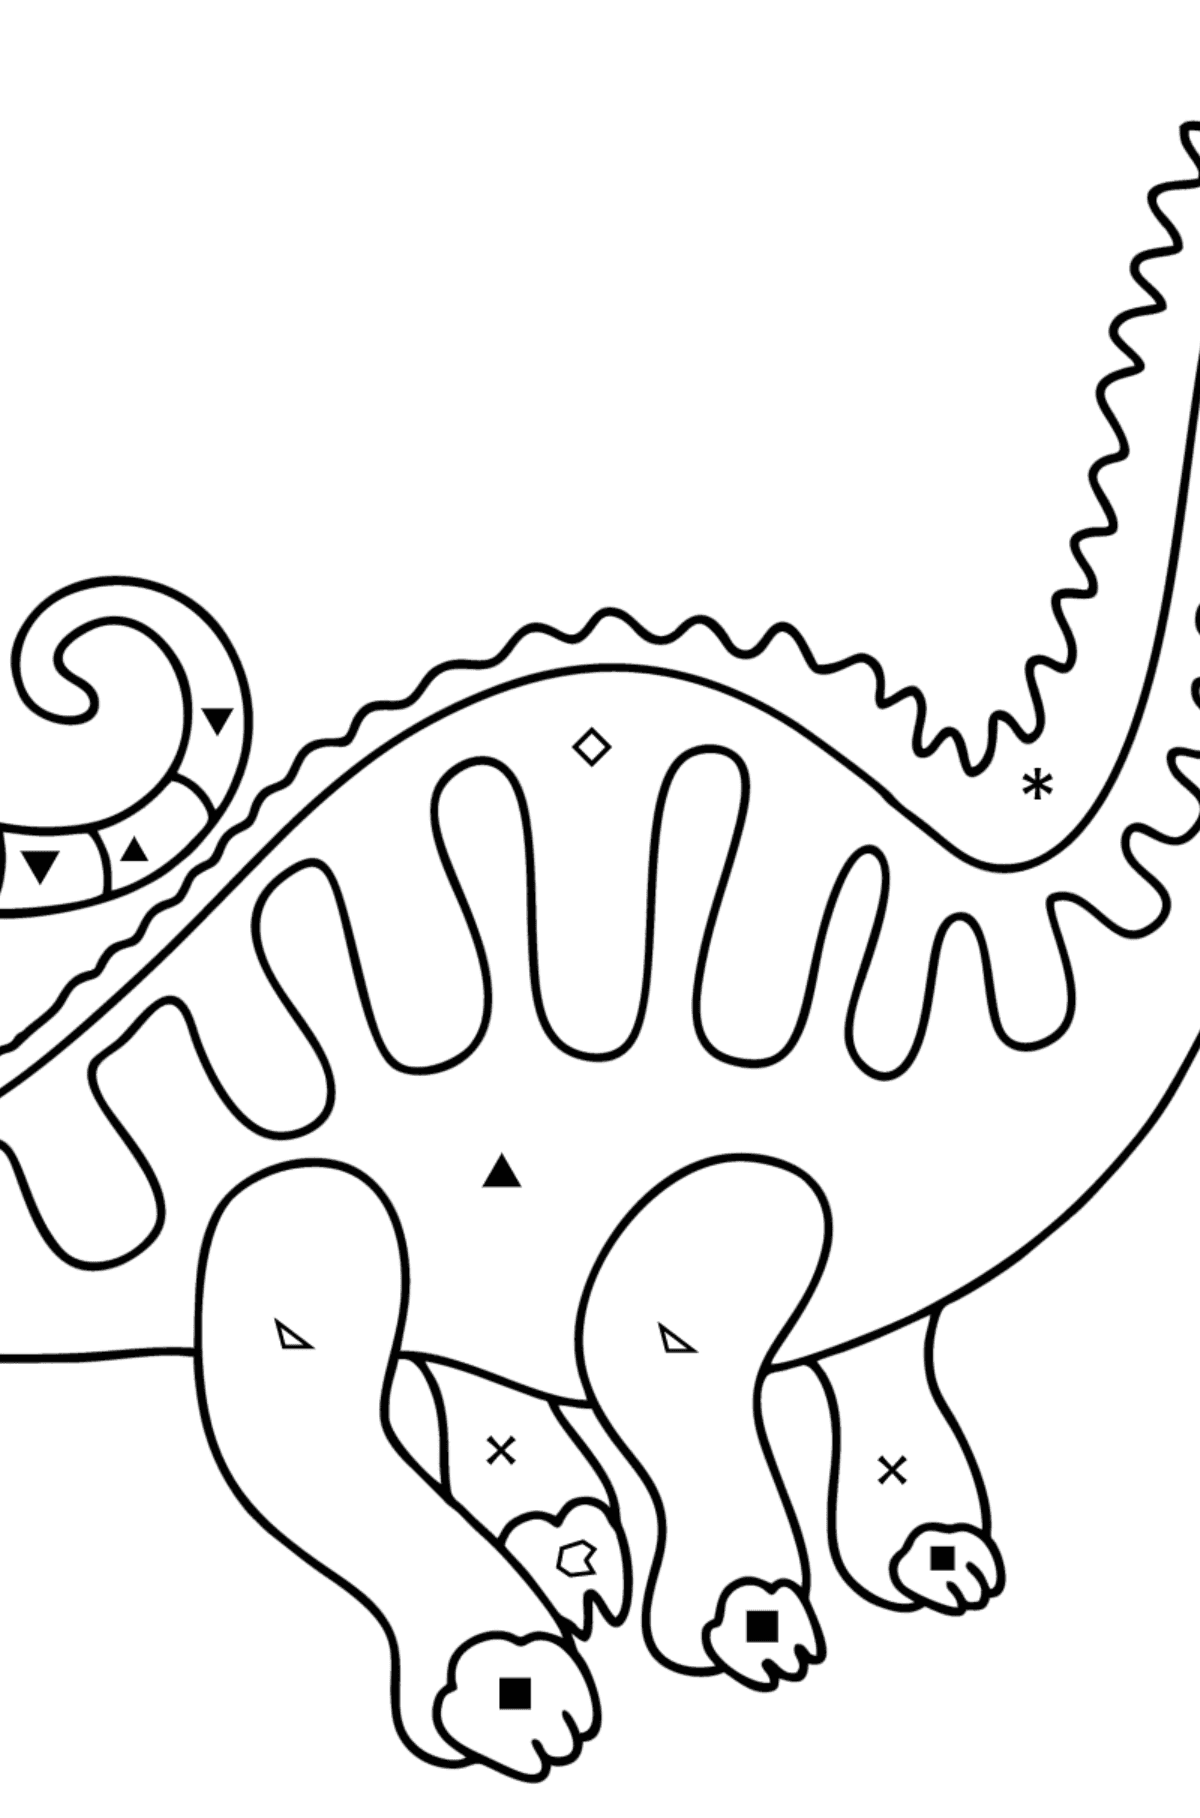 Apatosaurus coloring page - Coloring by Symbols and Geometric Shapes for Kids